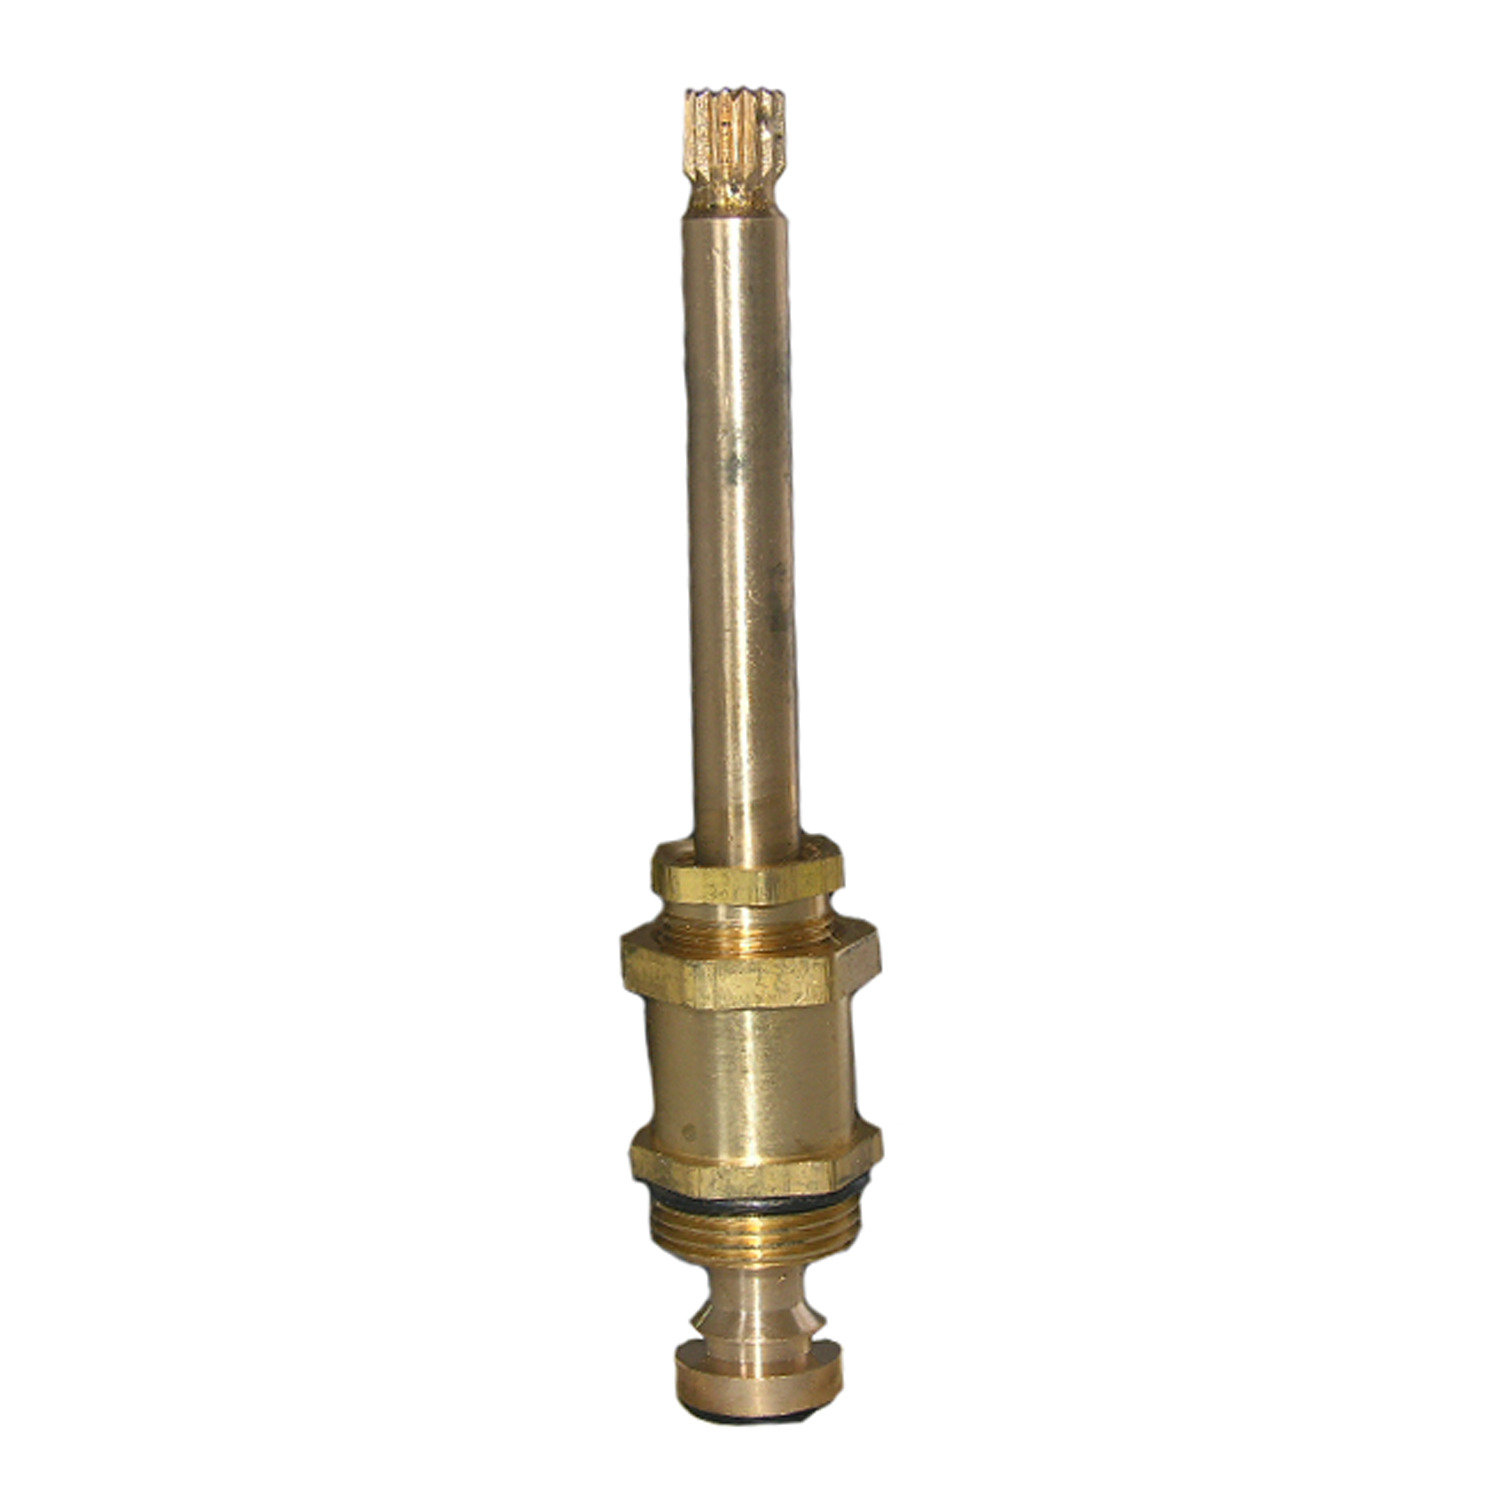 Lasco S-918-3 Cold/Hot Faucet Stem, Brass, For: 5283 Sayco Tub and Shower Faucets